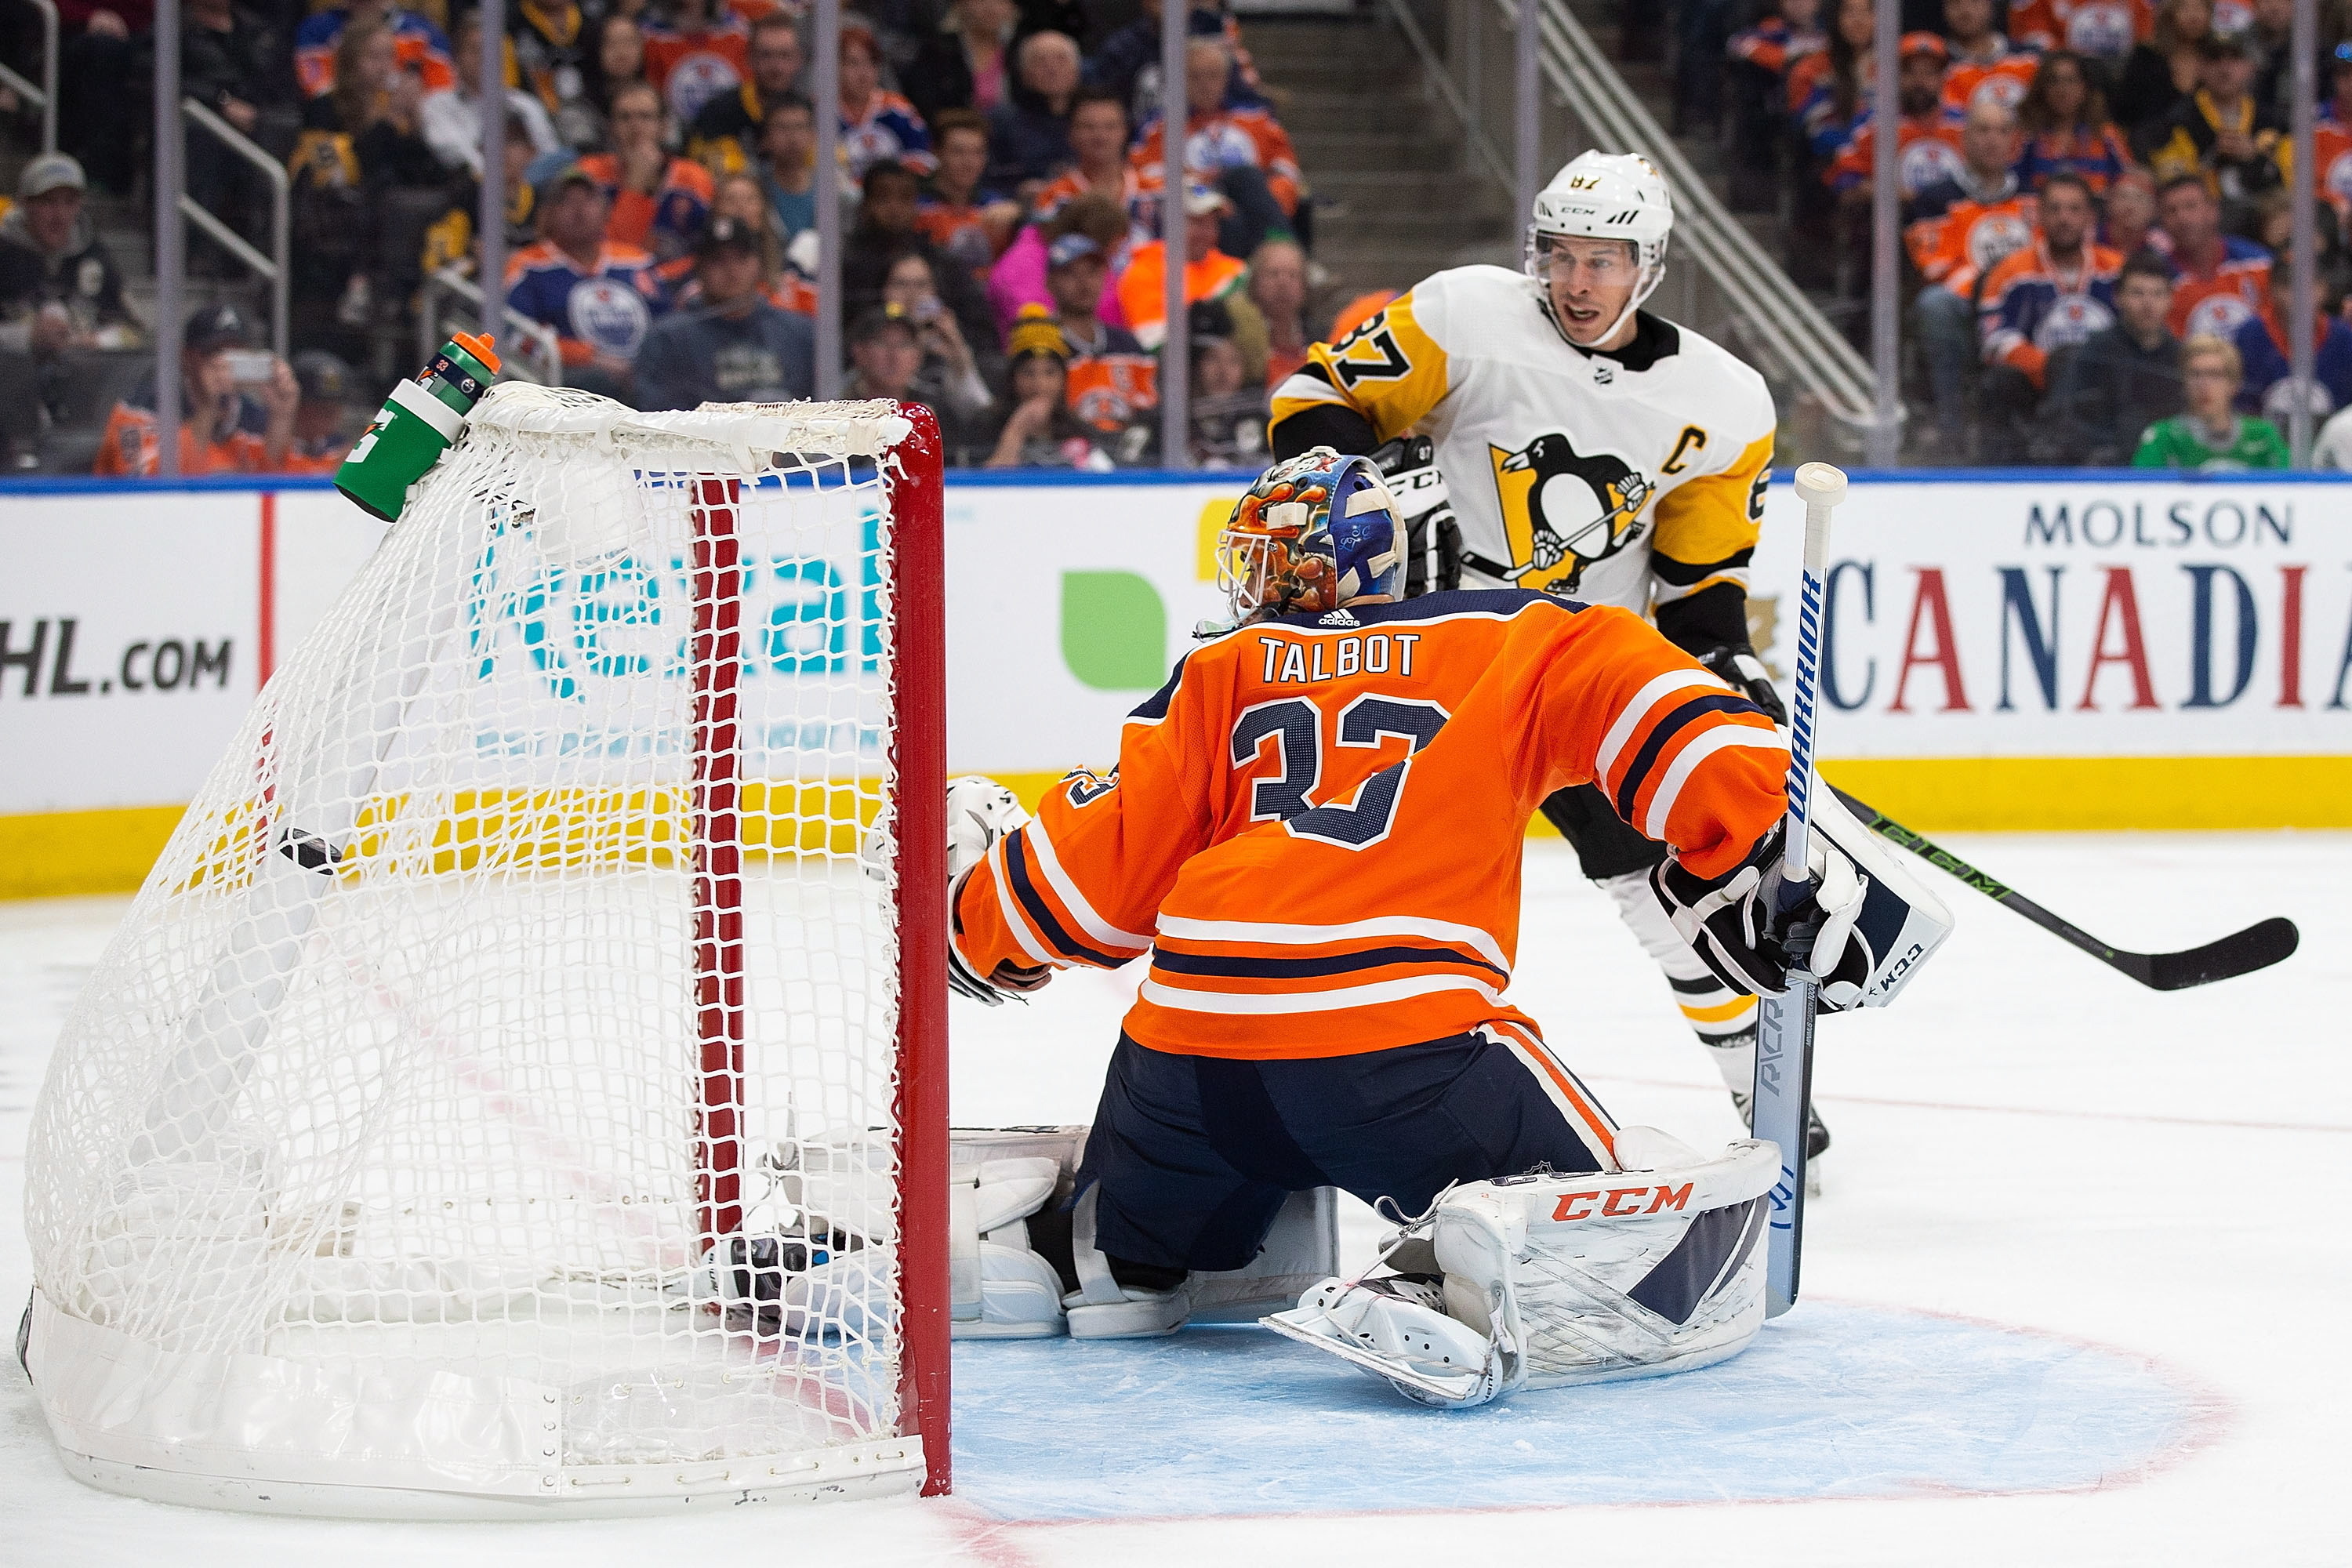 Crosby’s nifty move lifts Penguins to 6-5 OT win over Oilers